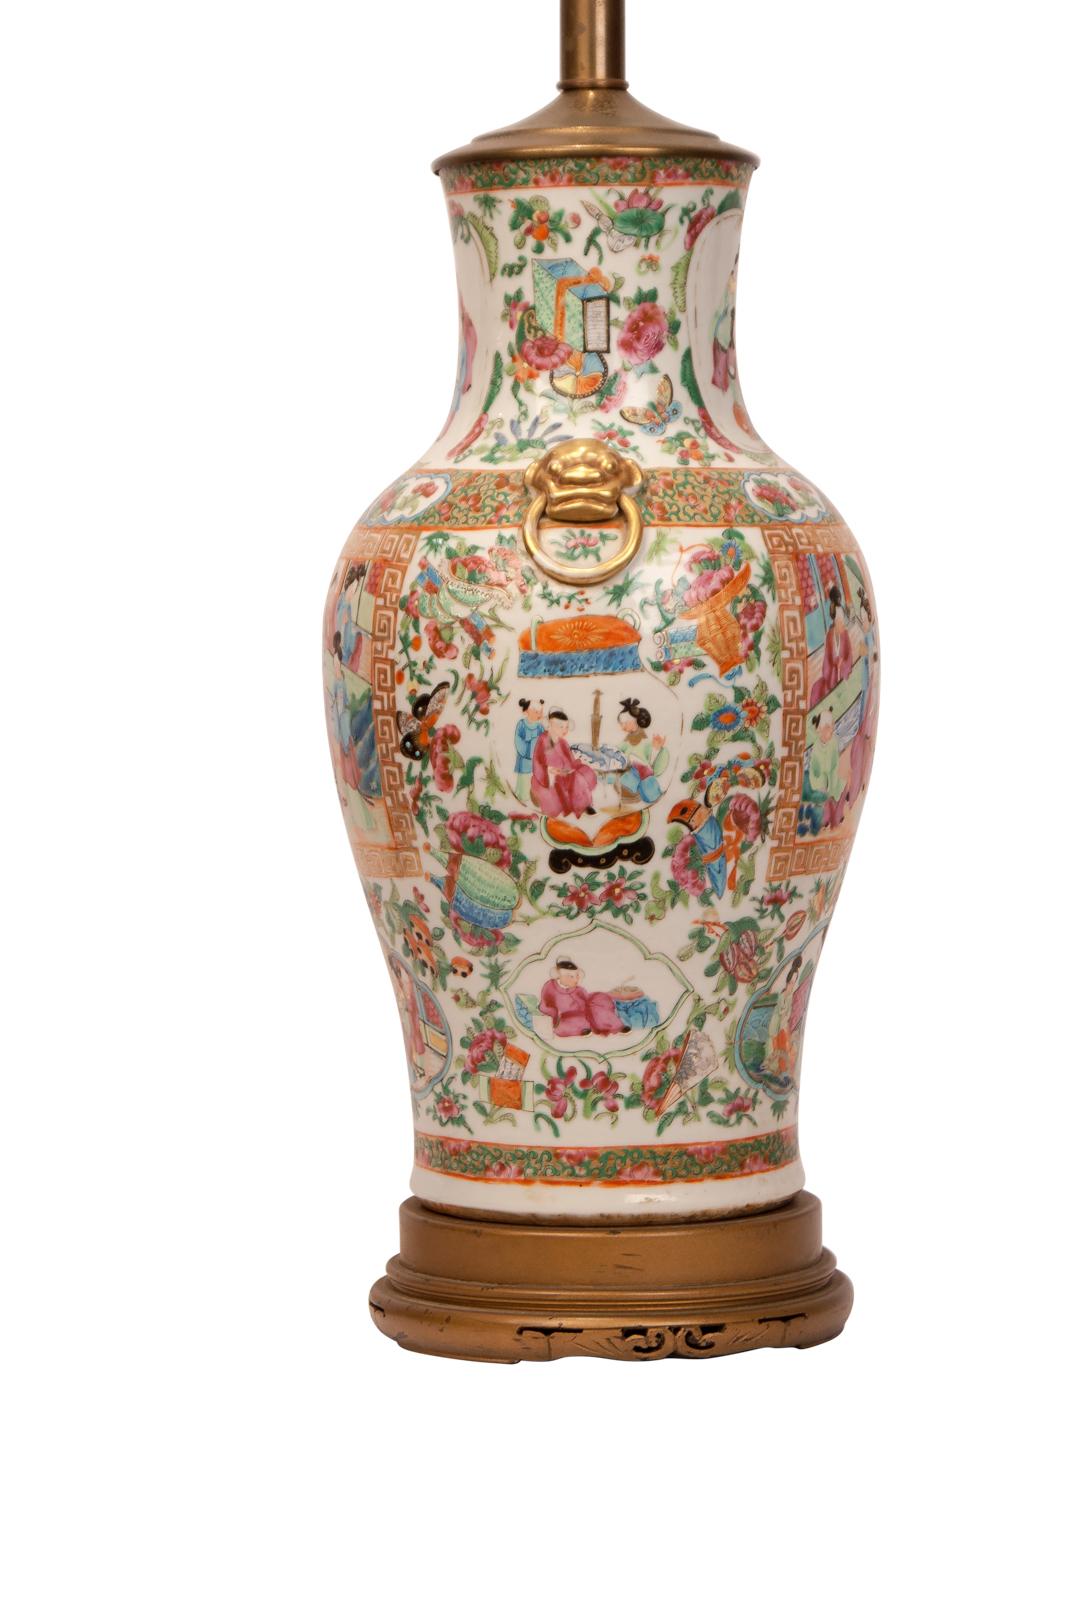 19th Century Large Pair of Rose Medallion Vases, Later Mounted as Lamps, China, circa 1850